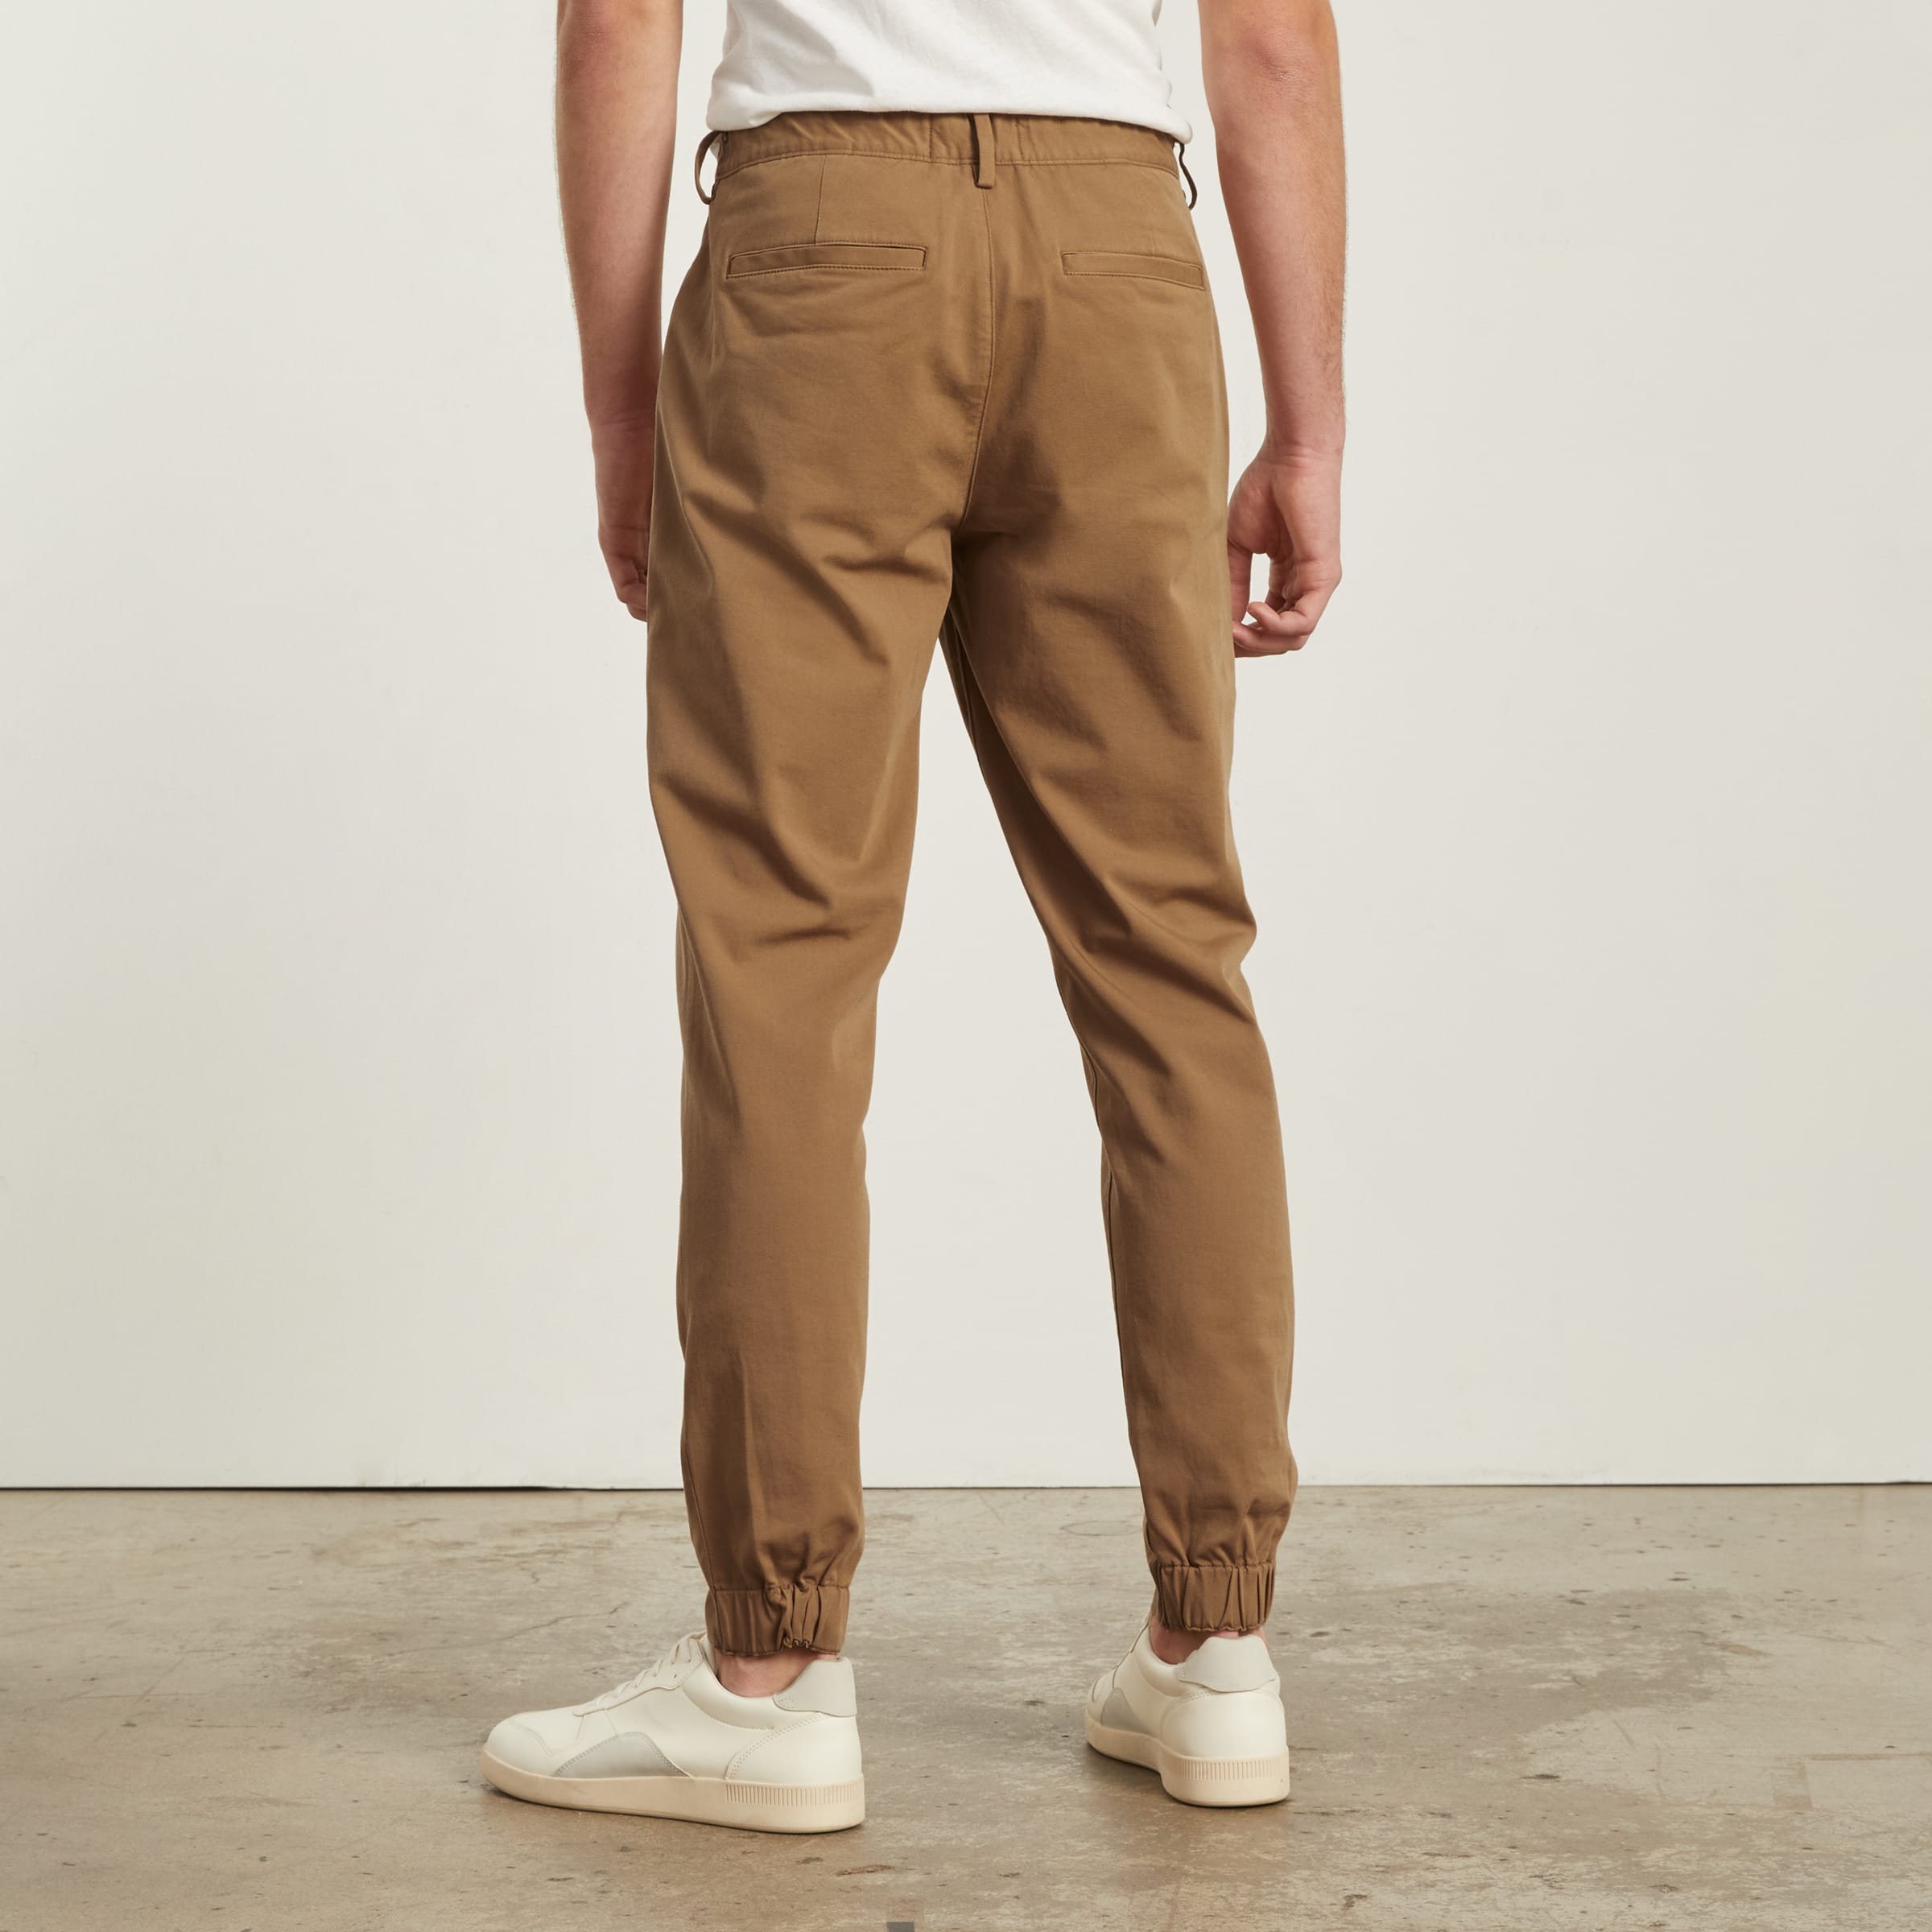 The Best Pants for Traveling, From Comfy Cargos to Stylish Slacks